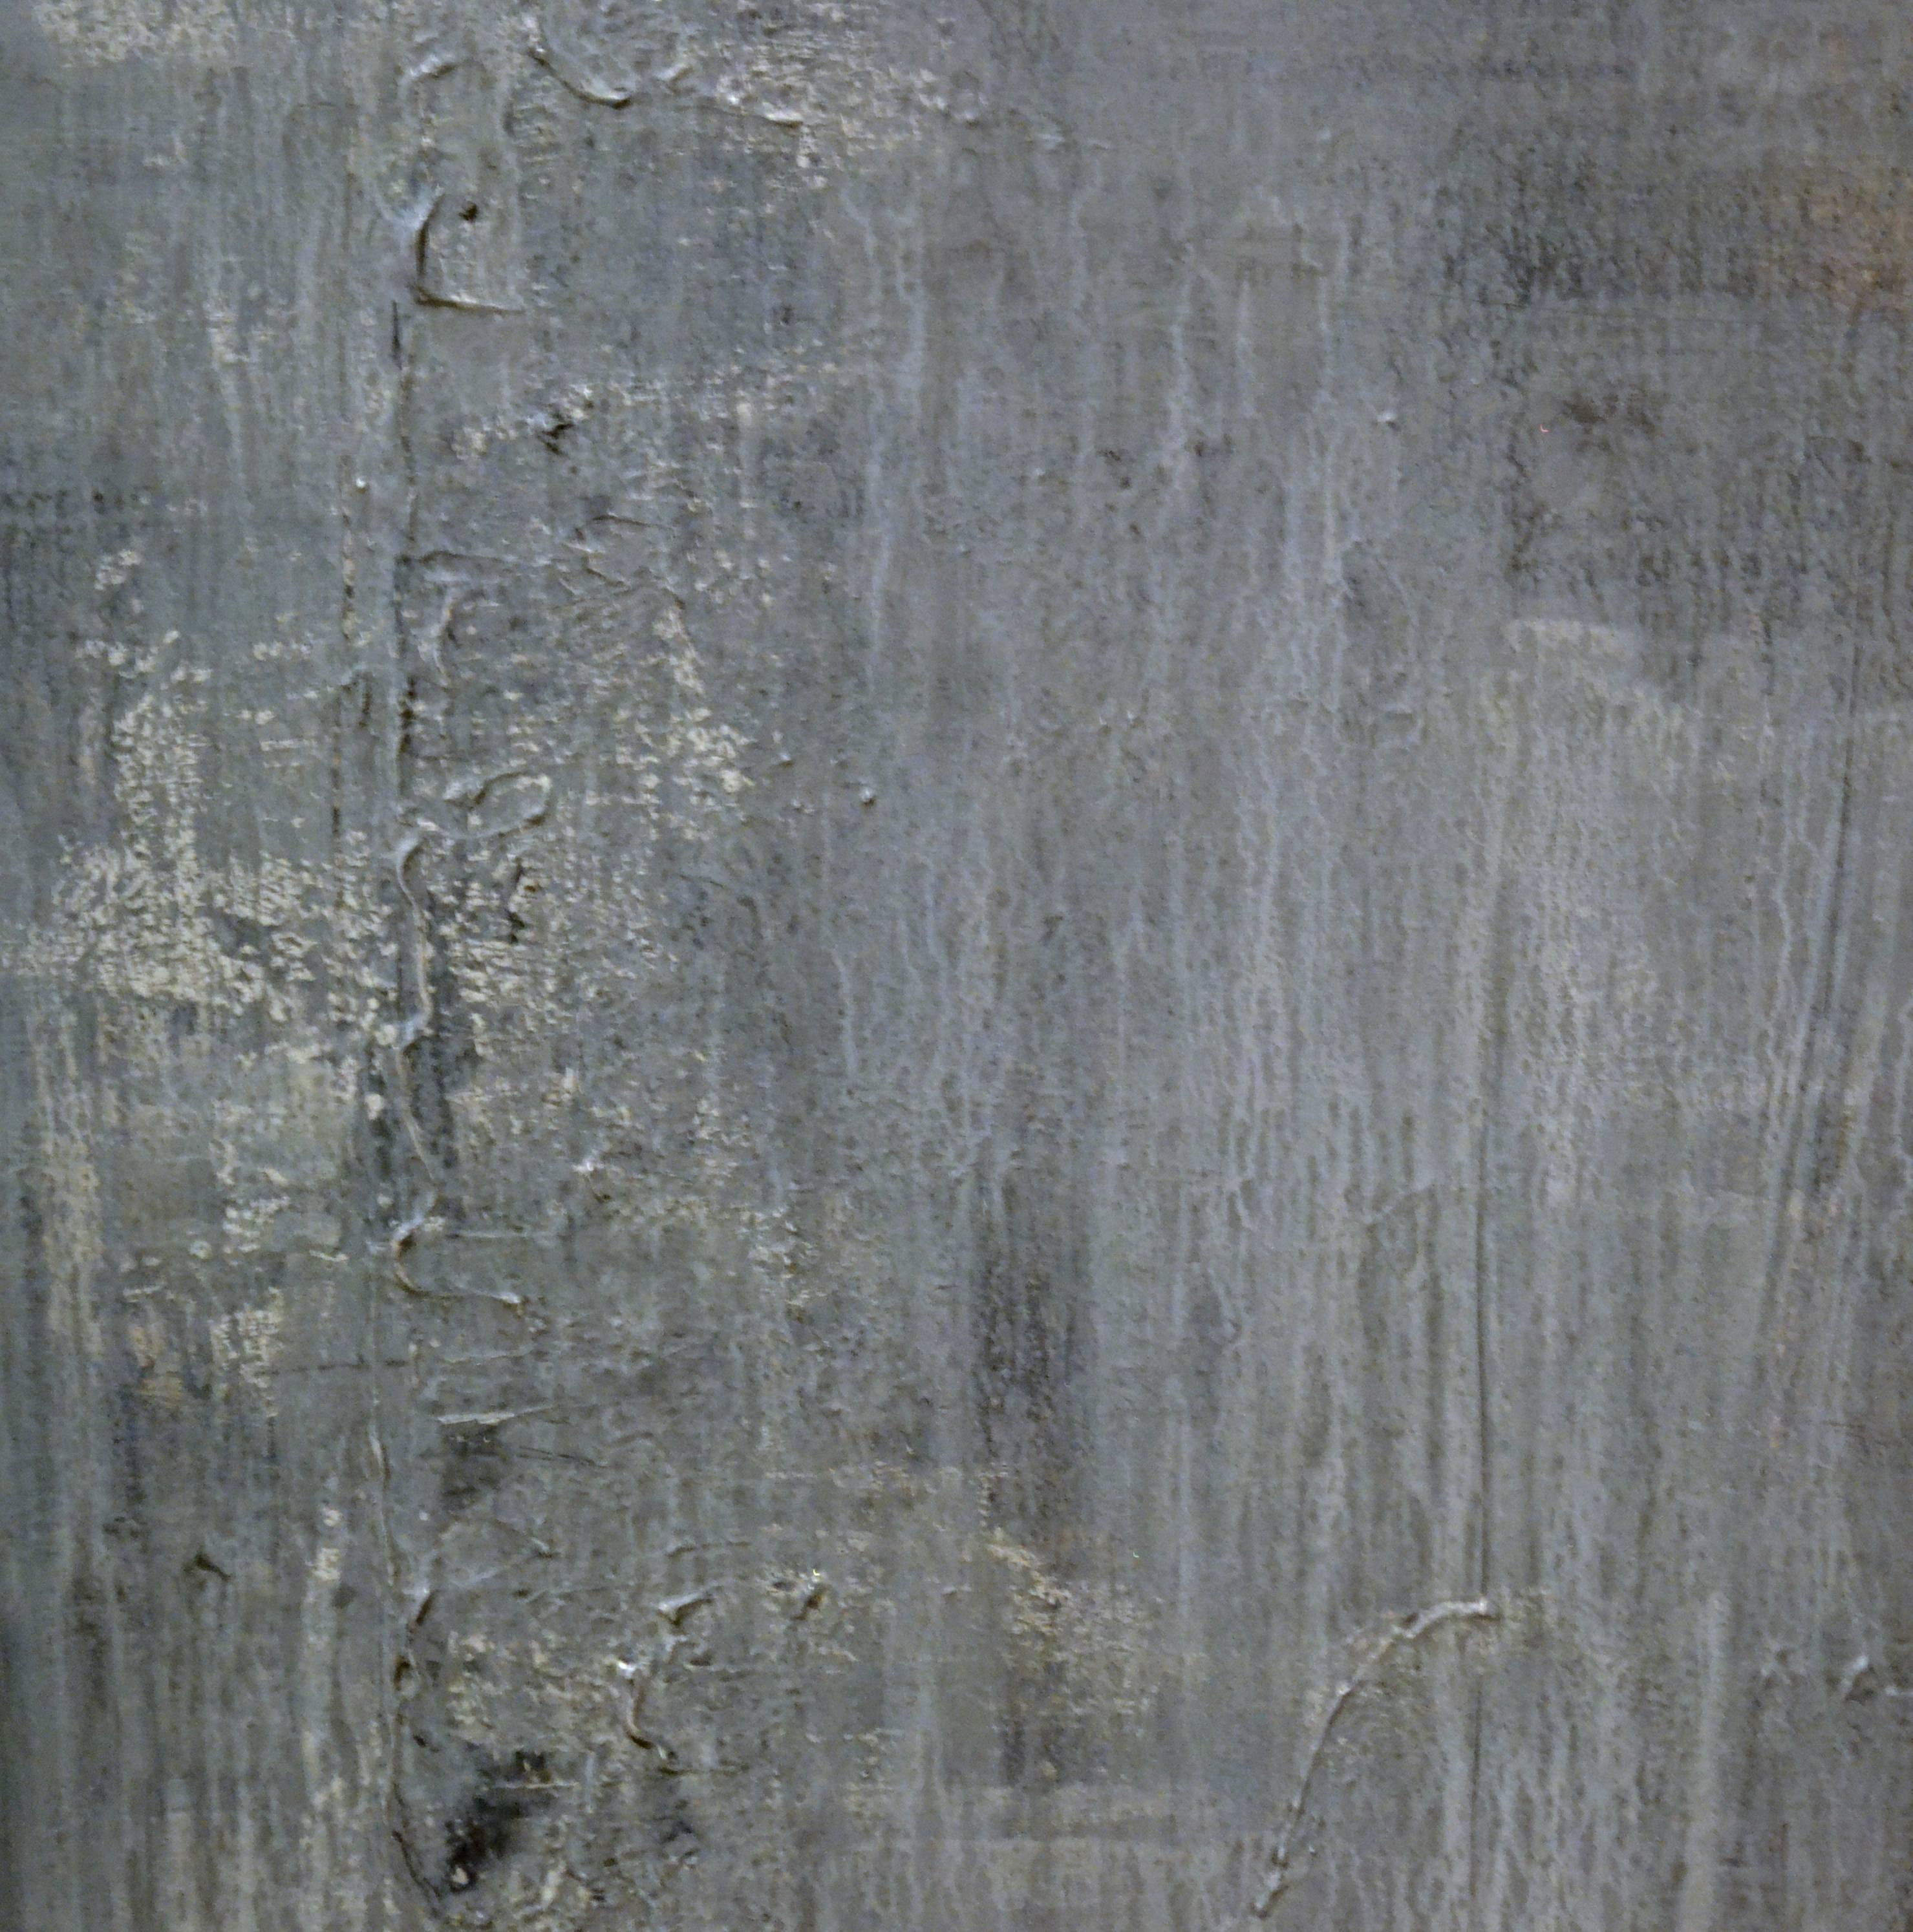 This painting is relatively small by artist Peri Gutierrez's standards, but it makes a powerful and elegant statement. Titled GALVANIZED and executed in mixed media with silver leaf on canvas with a matte finish, it reflects the artist's fascination